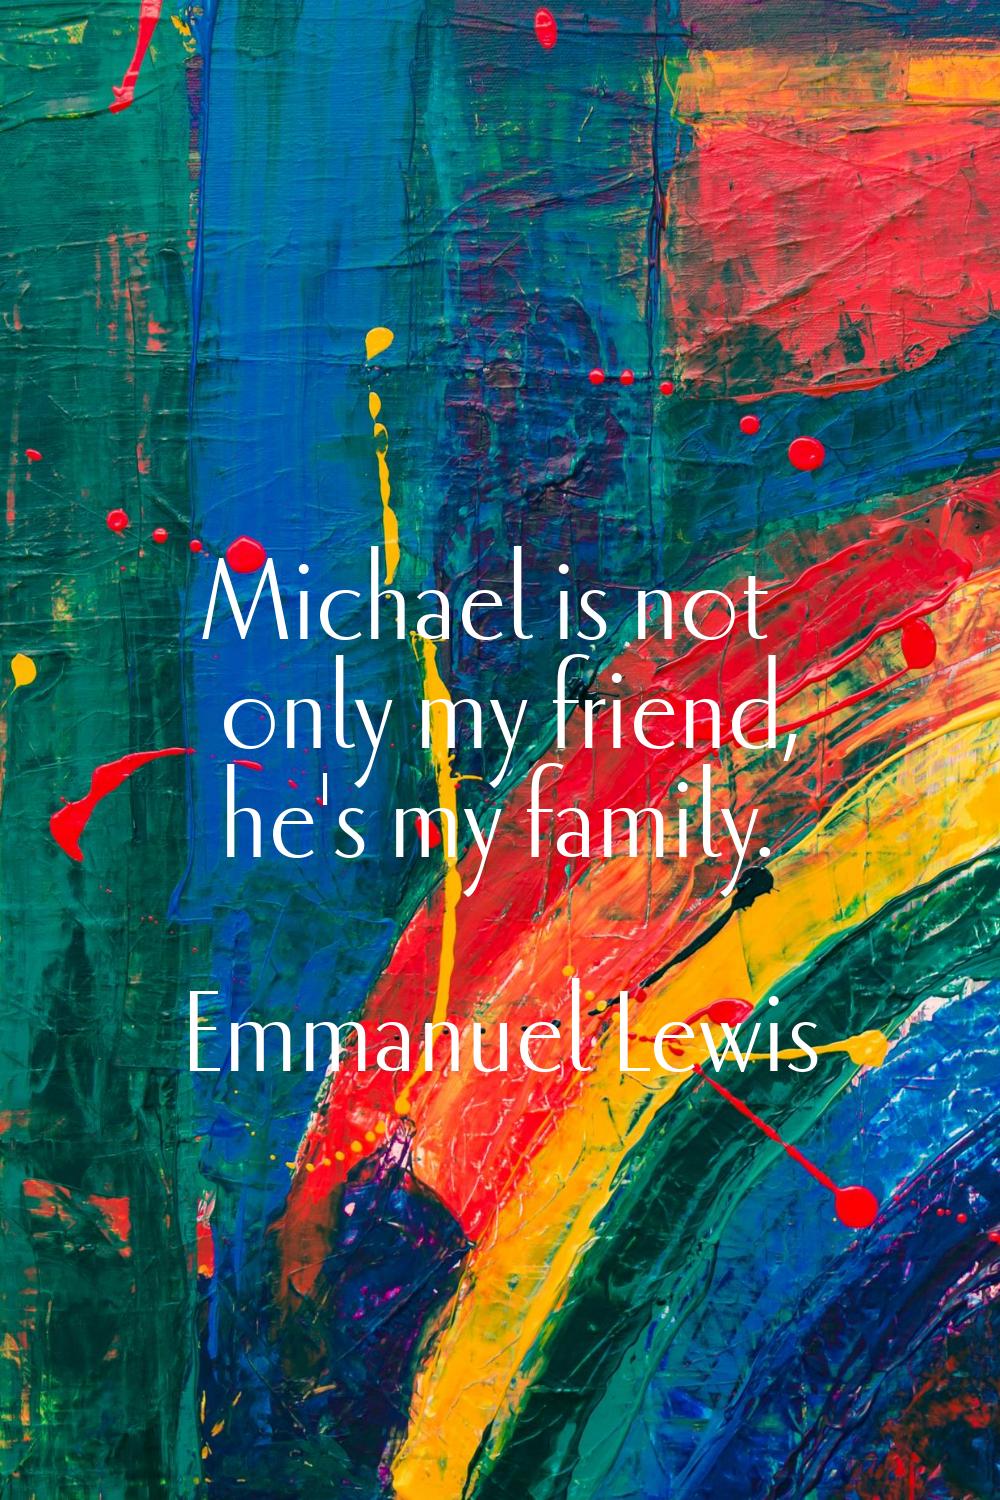 Michael is not only my friend, he's my family.